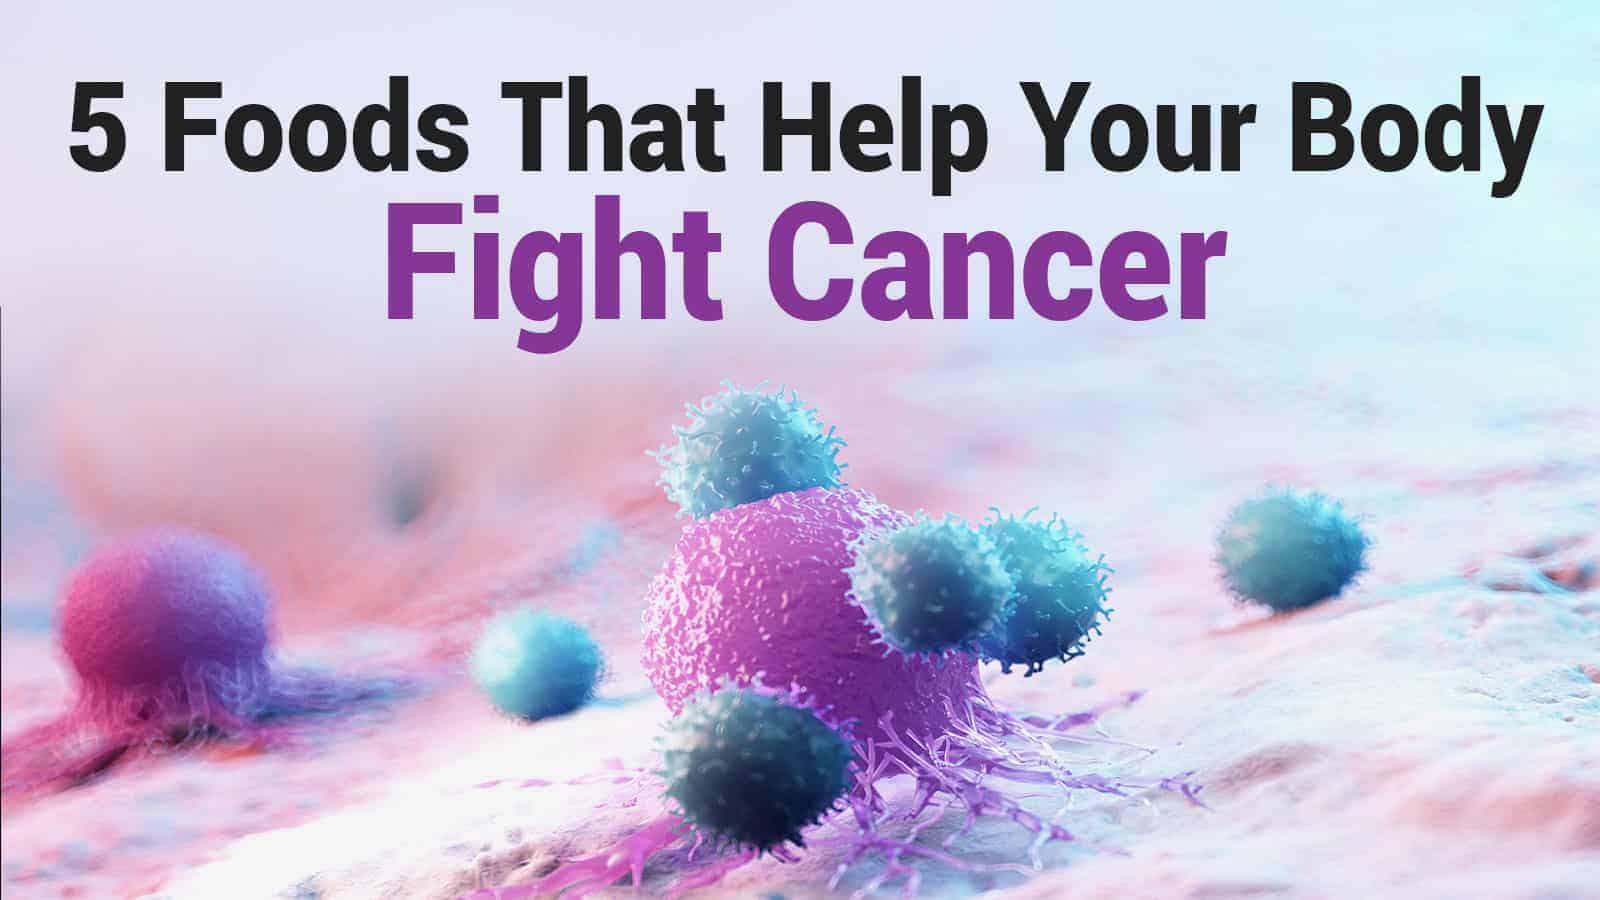 5 Foods That Help Your Body Fight Cancer